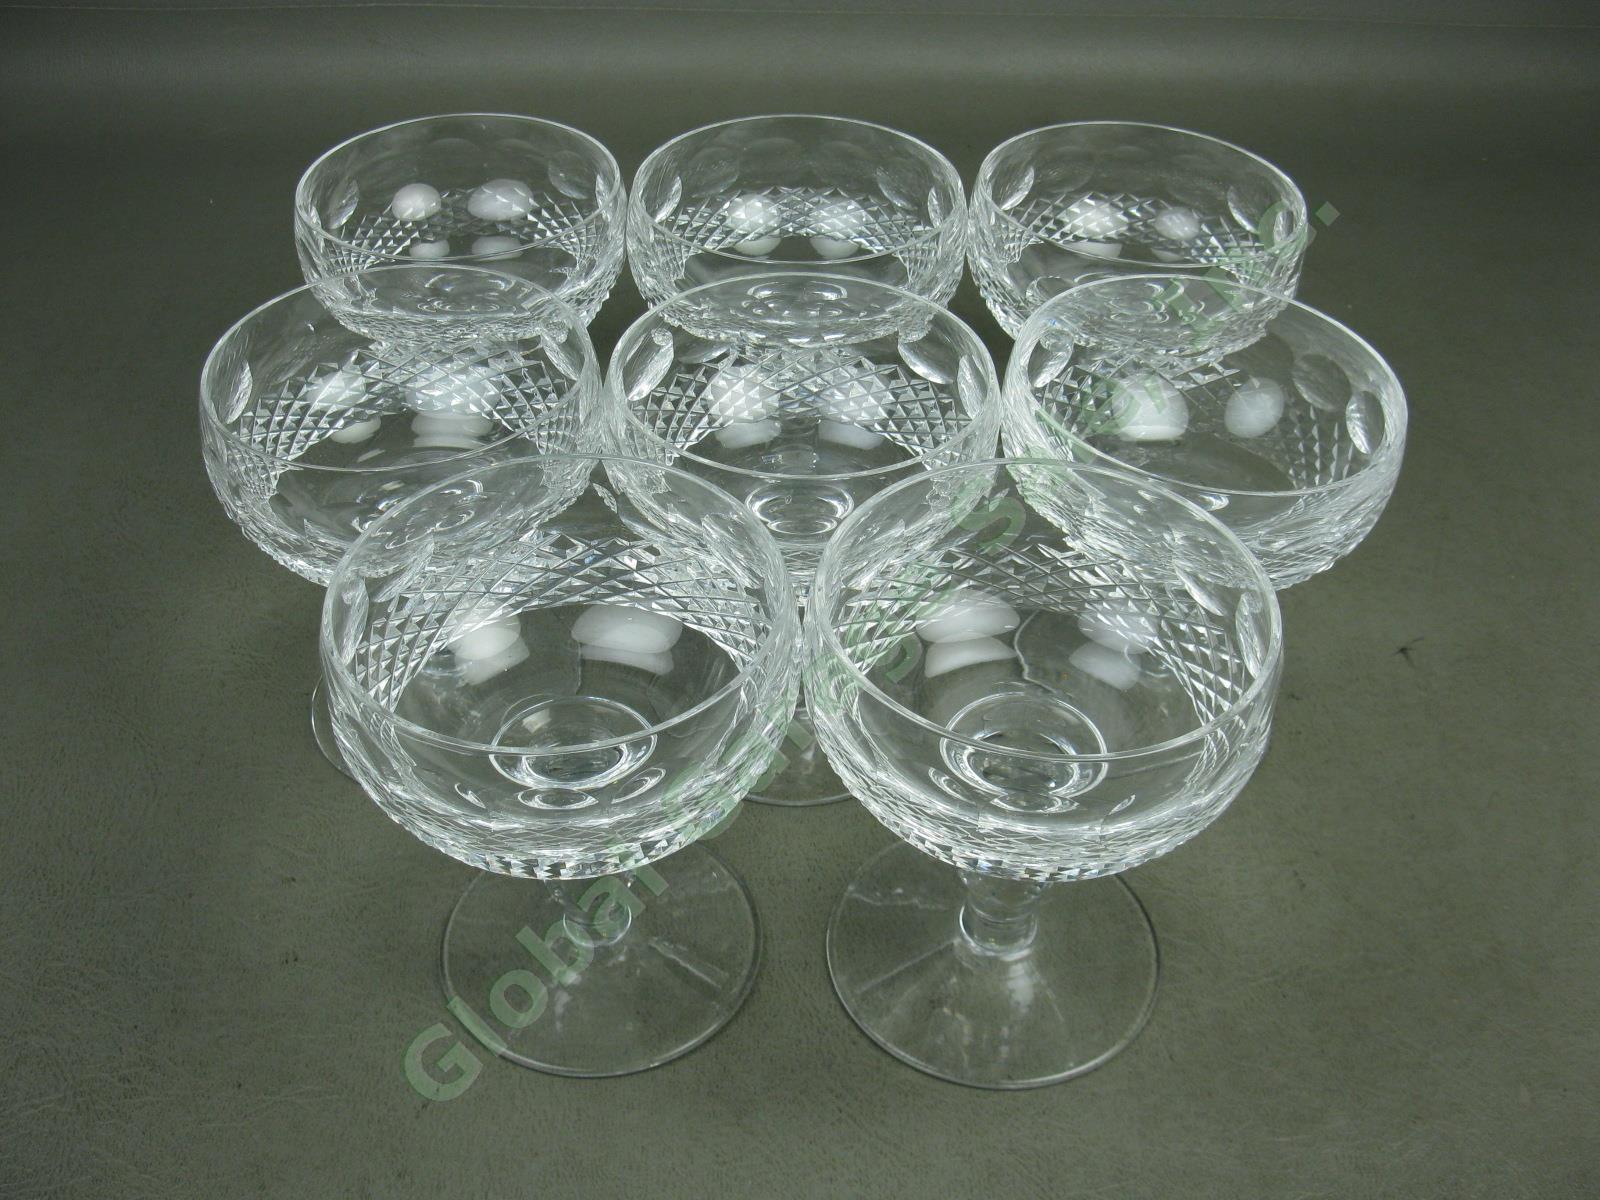 8 Waterford Crystal Colleen Short Stem Champagne Tall Sherbet Glasses Set 4-3/8"